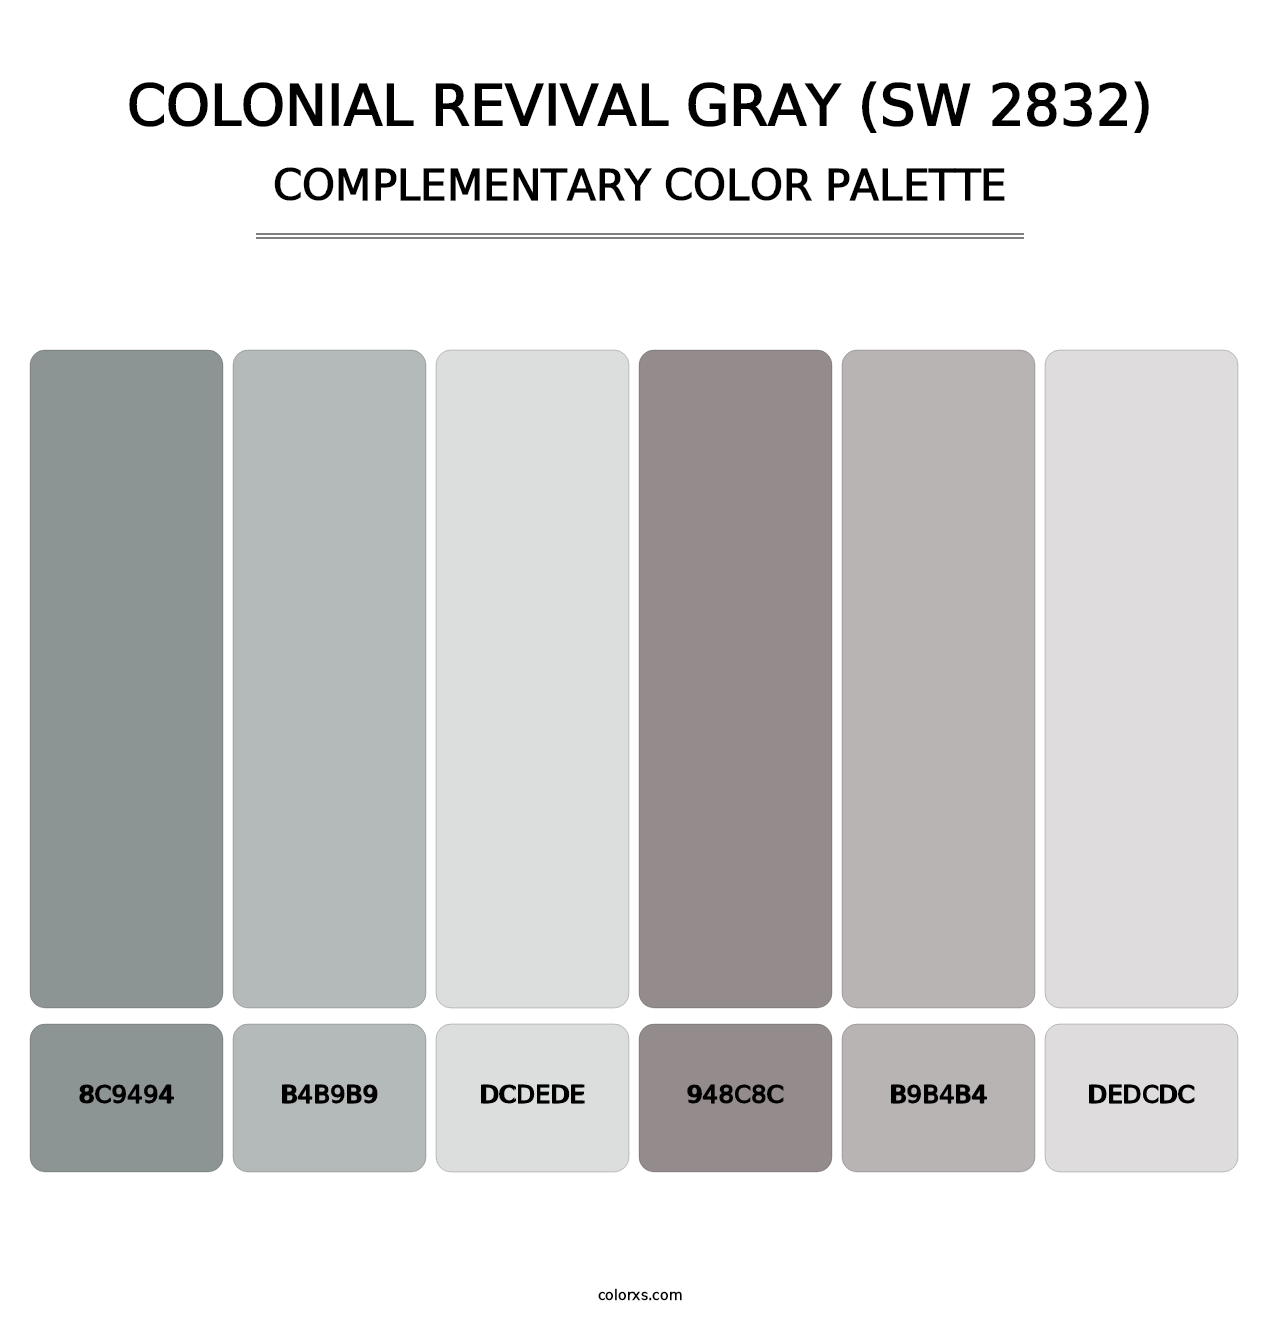 Colonial Revival Gray (SW 2832) - Complementary Color Palette